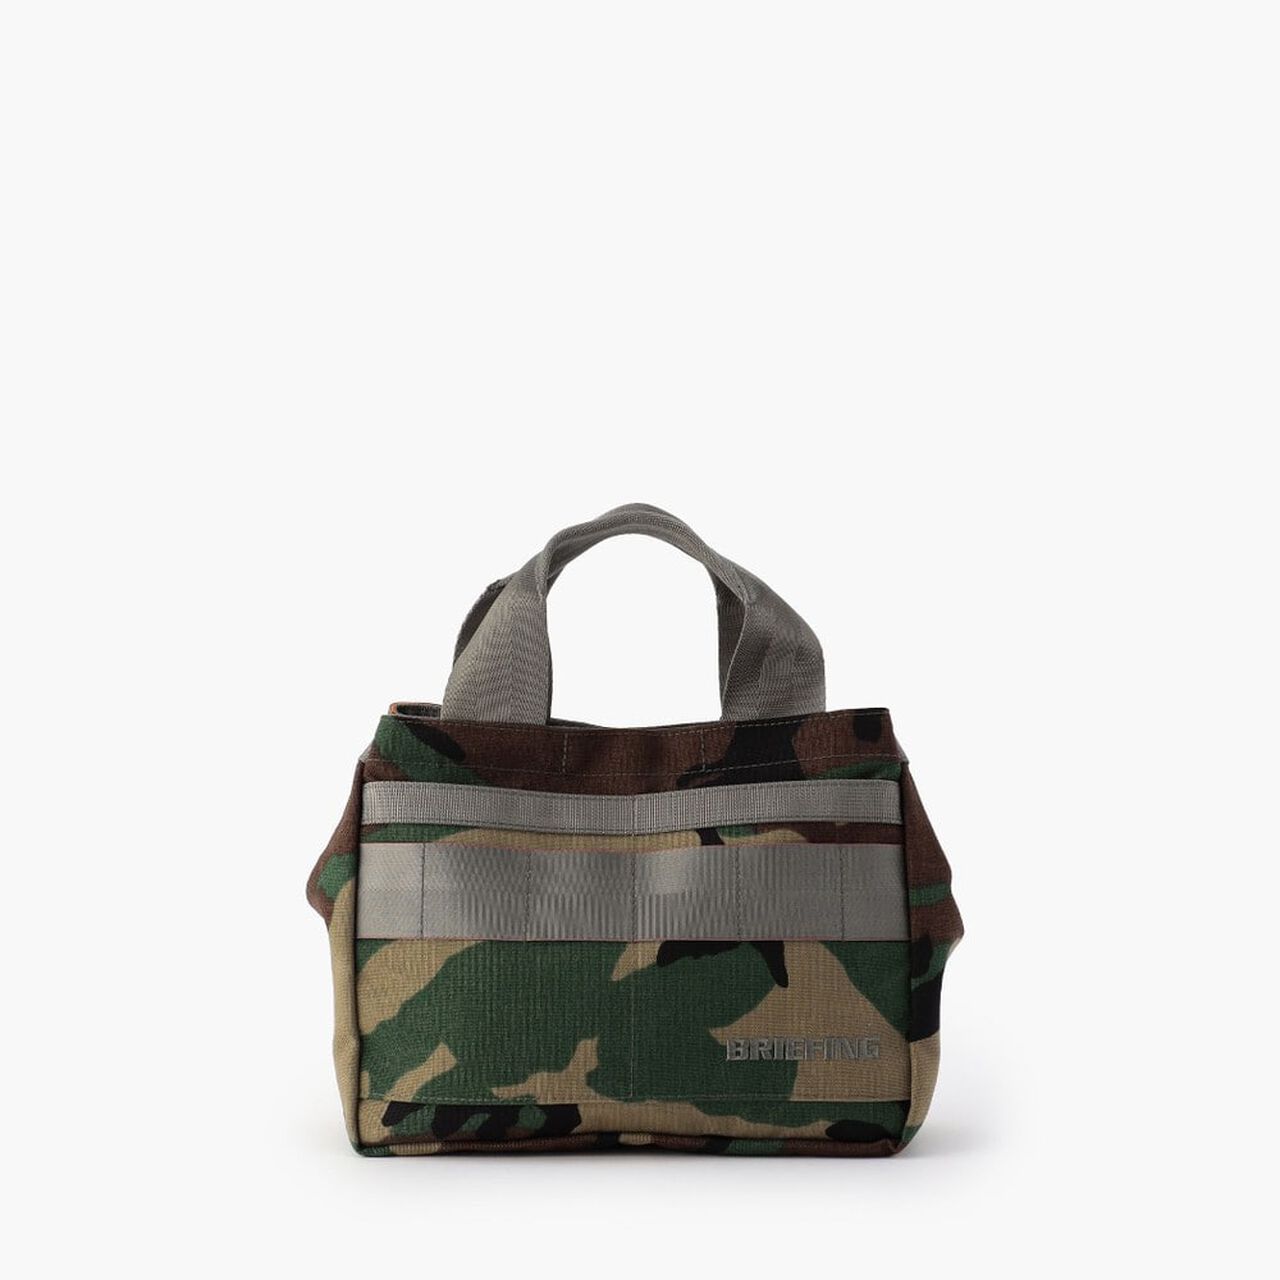 CART TOTE WOLF GRAY,Woodland Camo, large image number 0